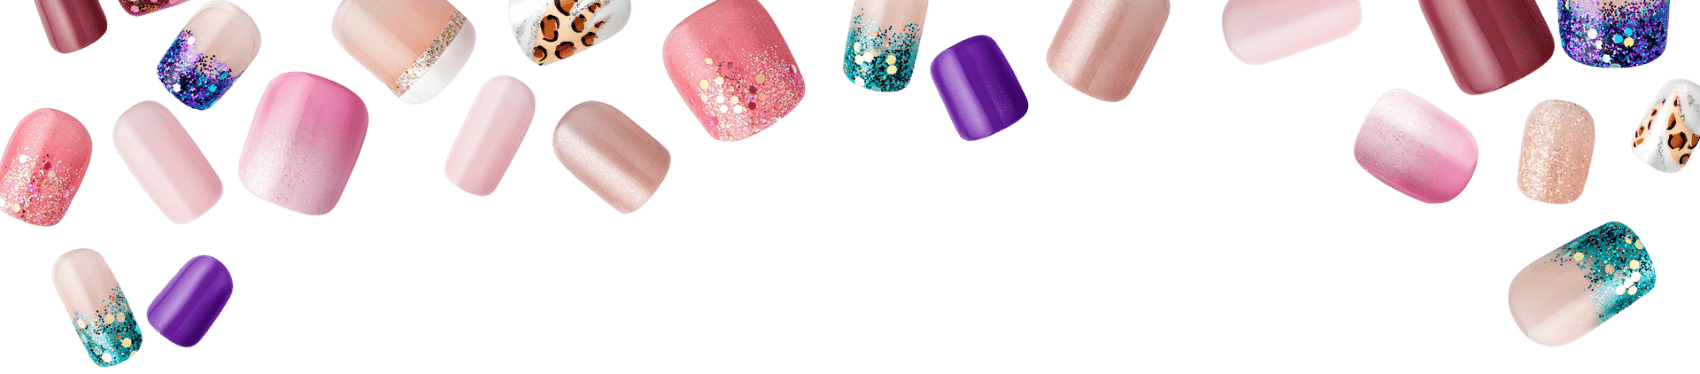 Acrylic Nails Download Transparent PNG Image